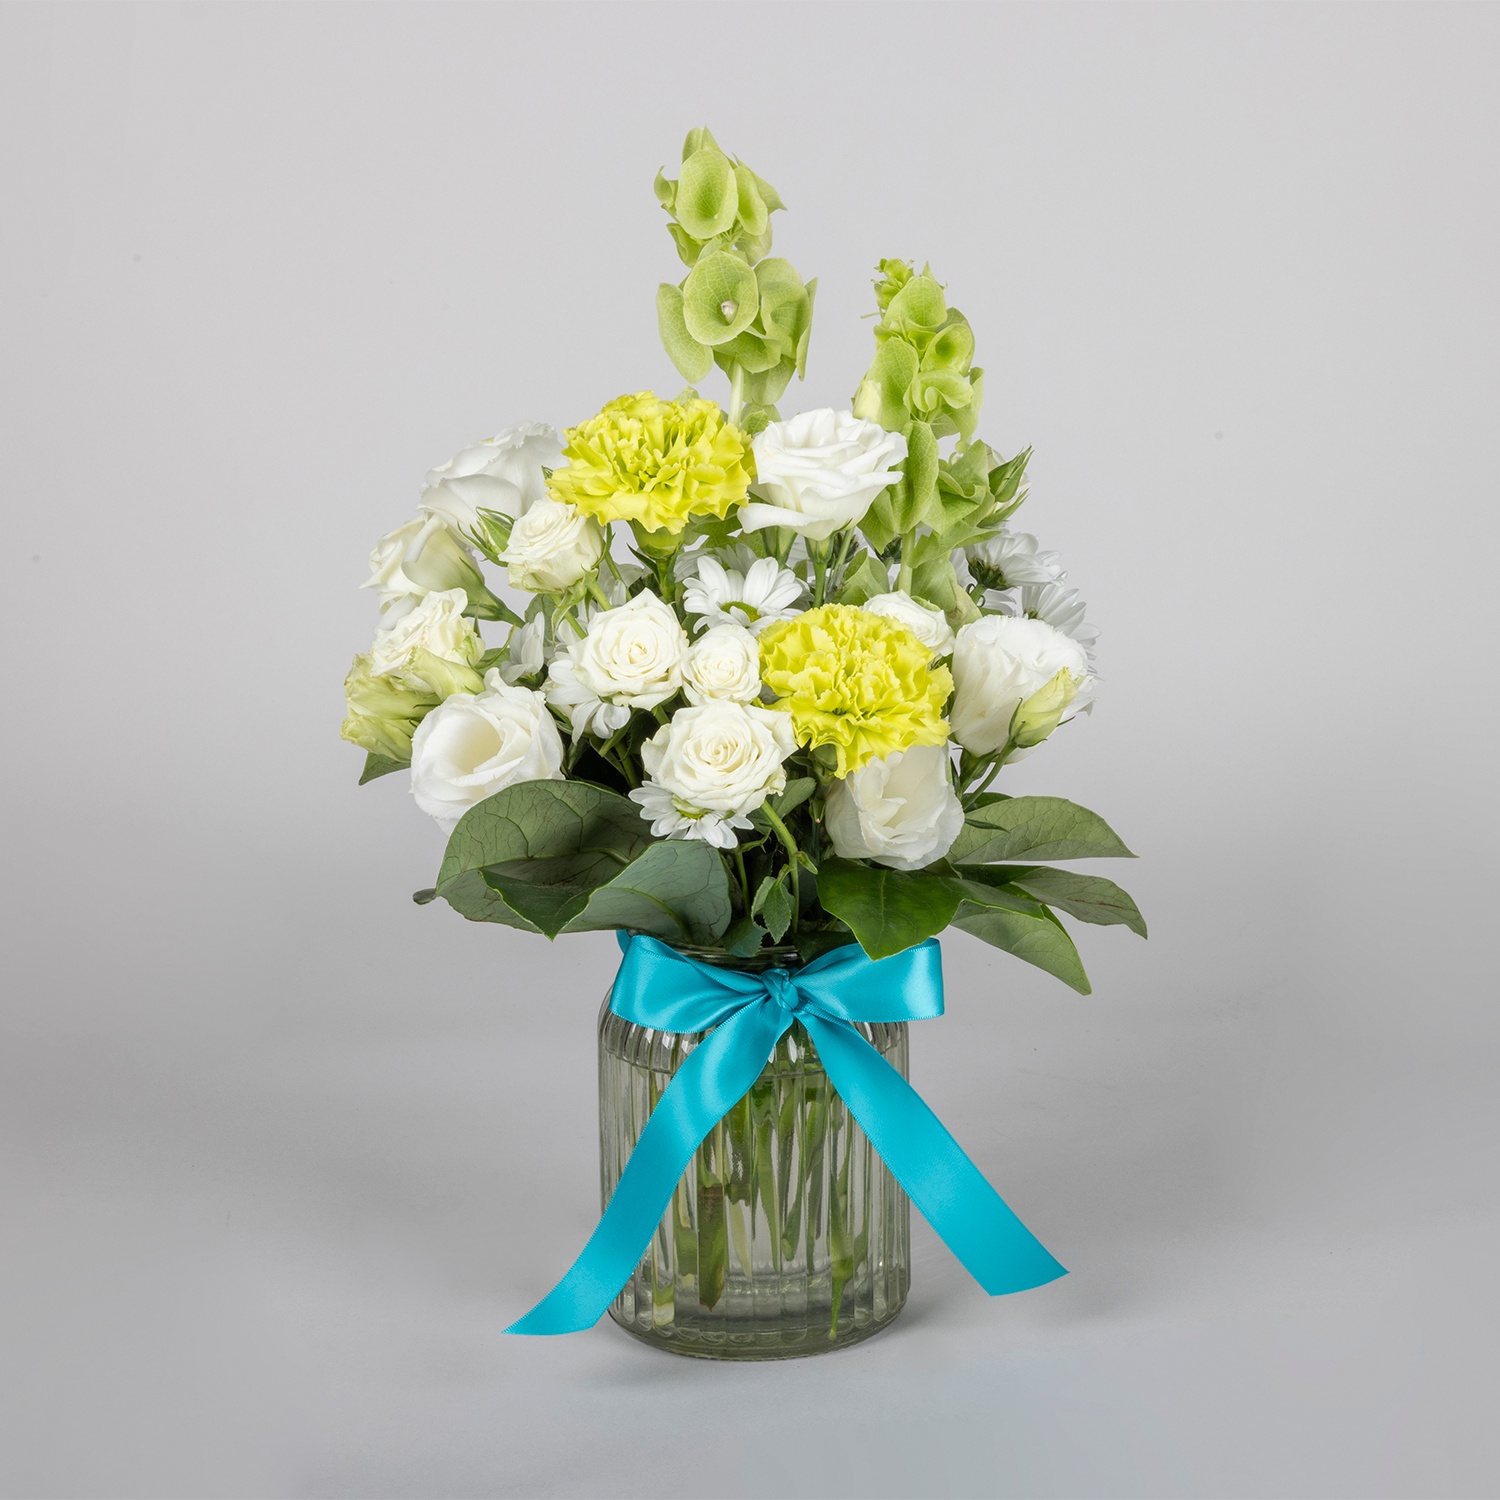 Flowers for Ovarian Cancer